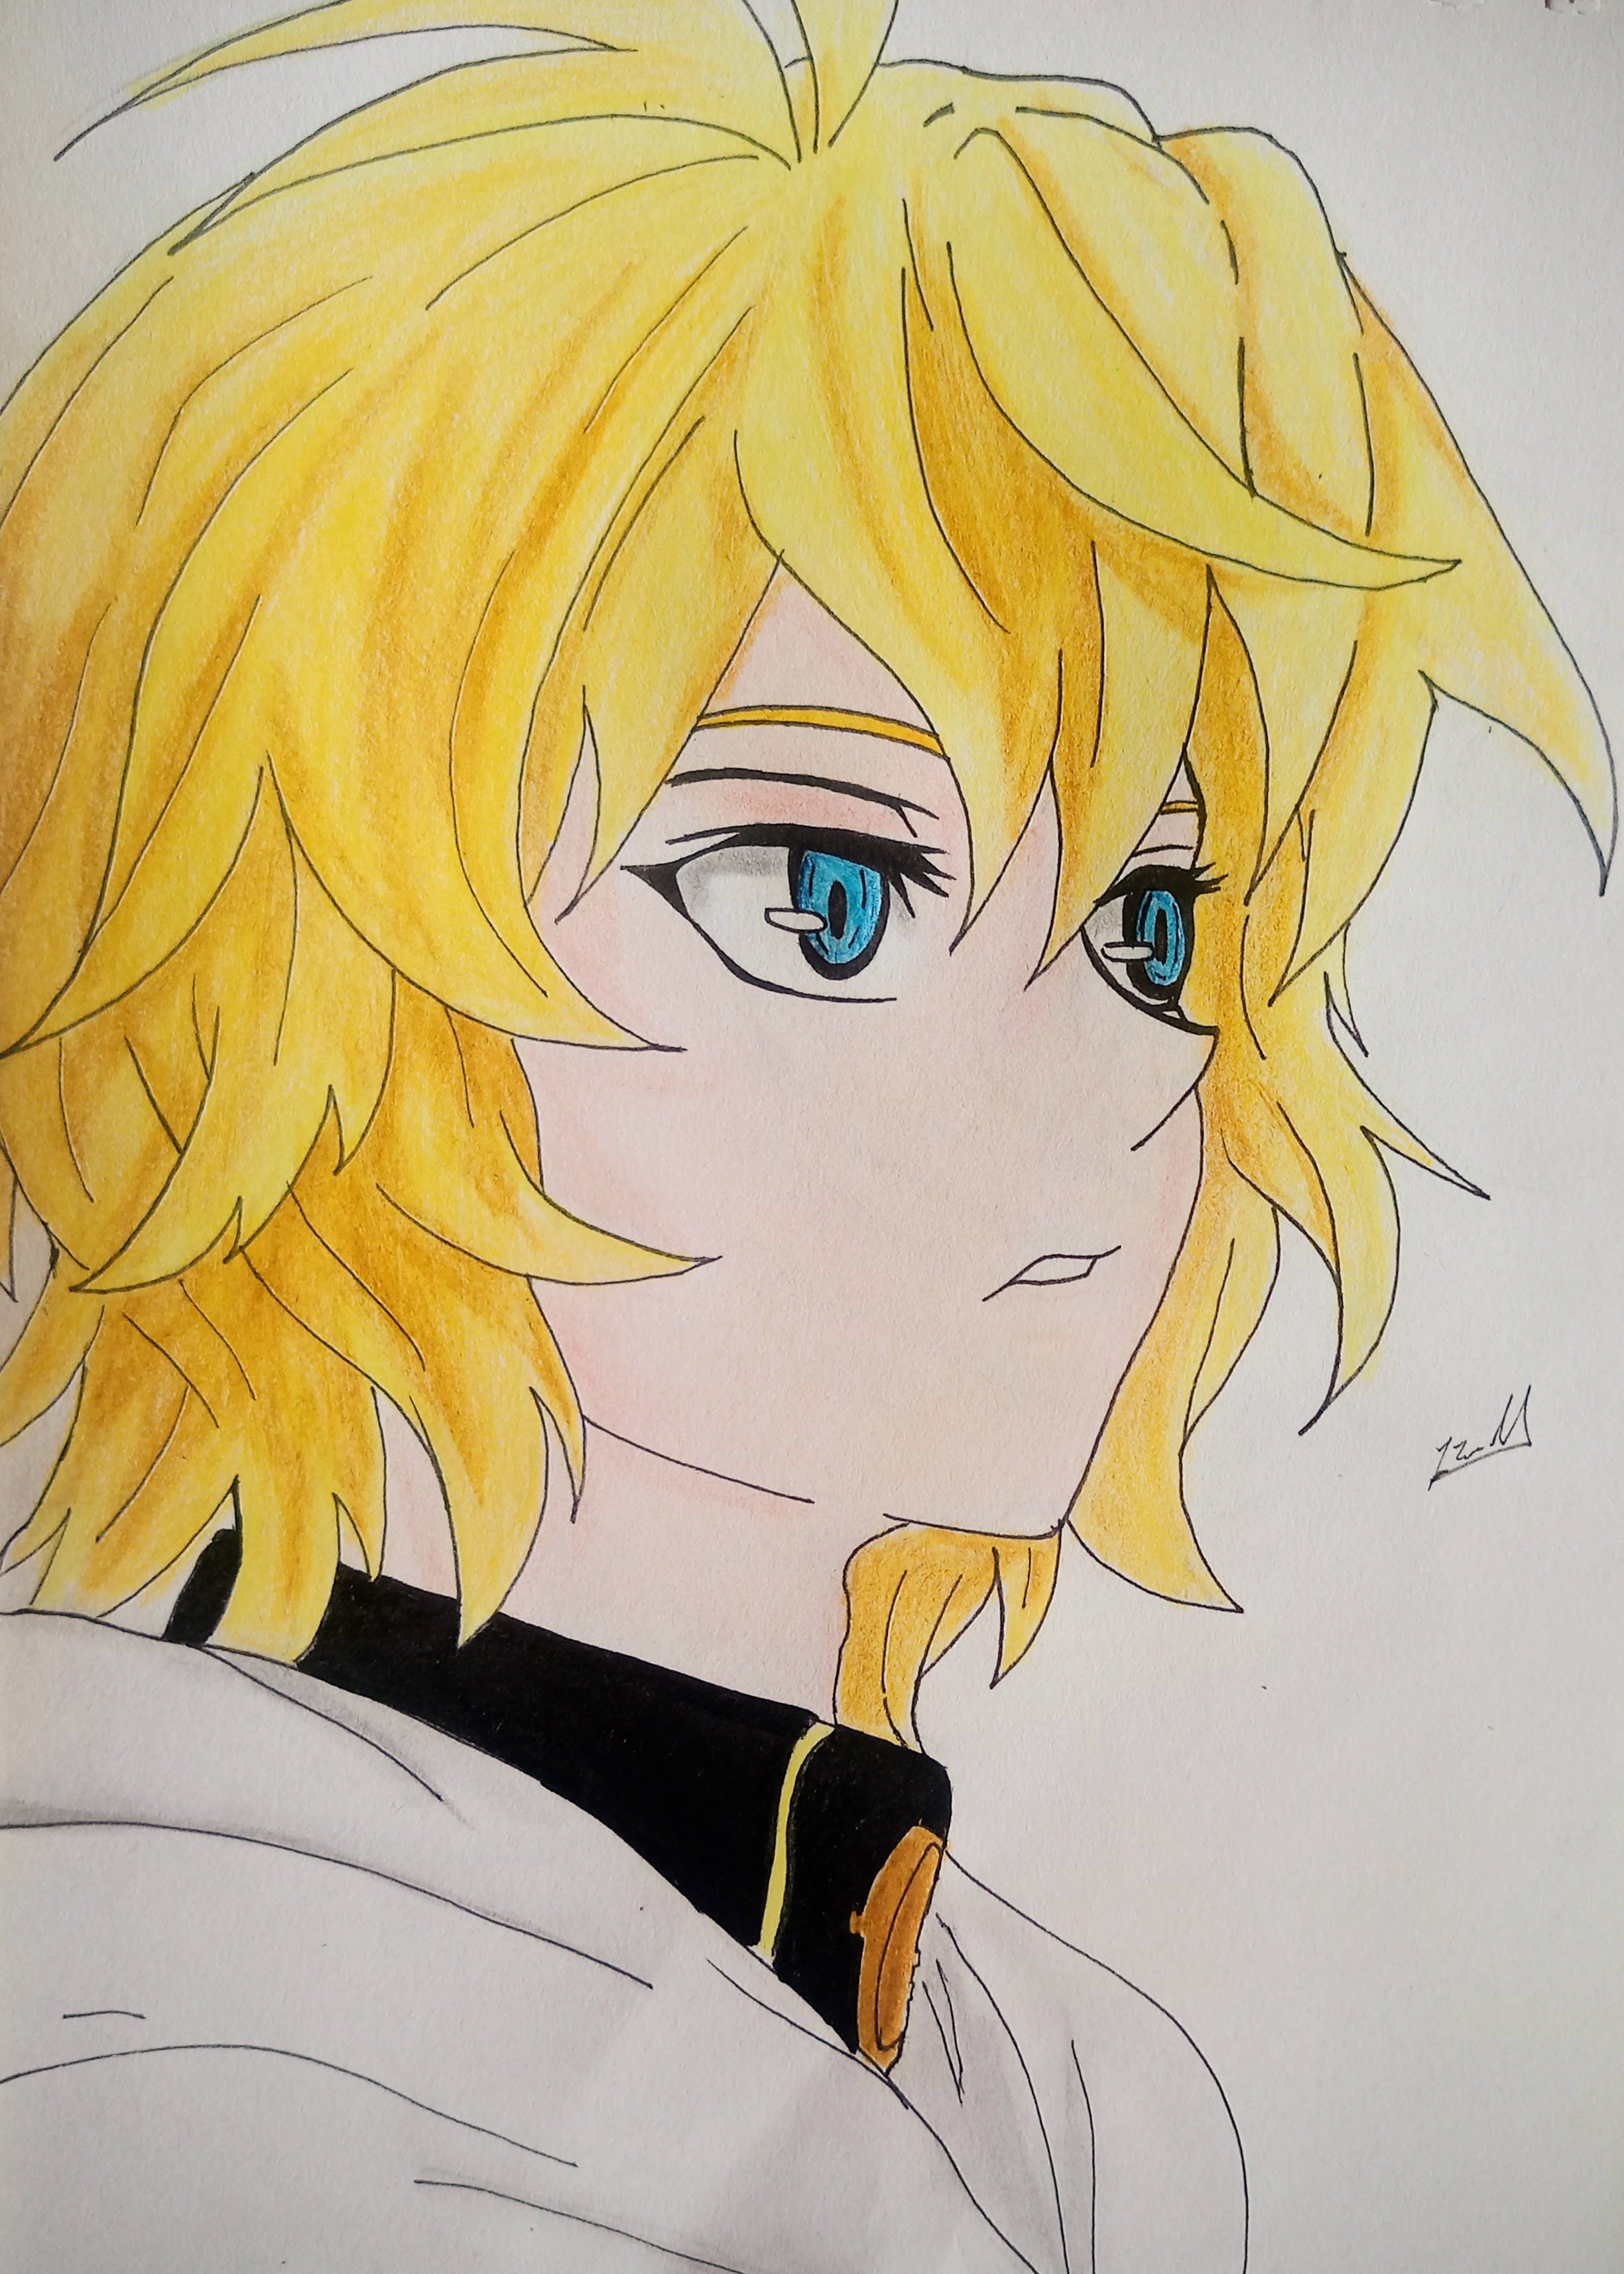 Do pencil drawings of anime,manga characters by Izumi_chan11 | Fiverr